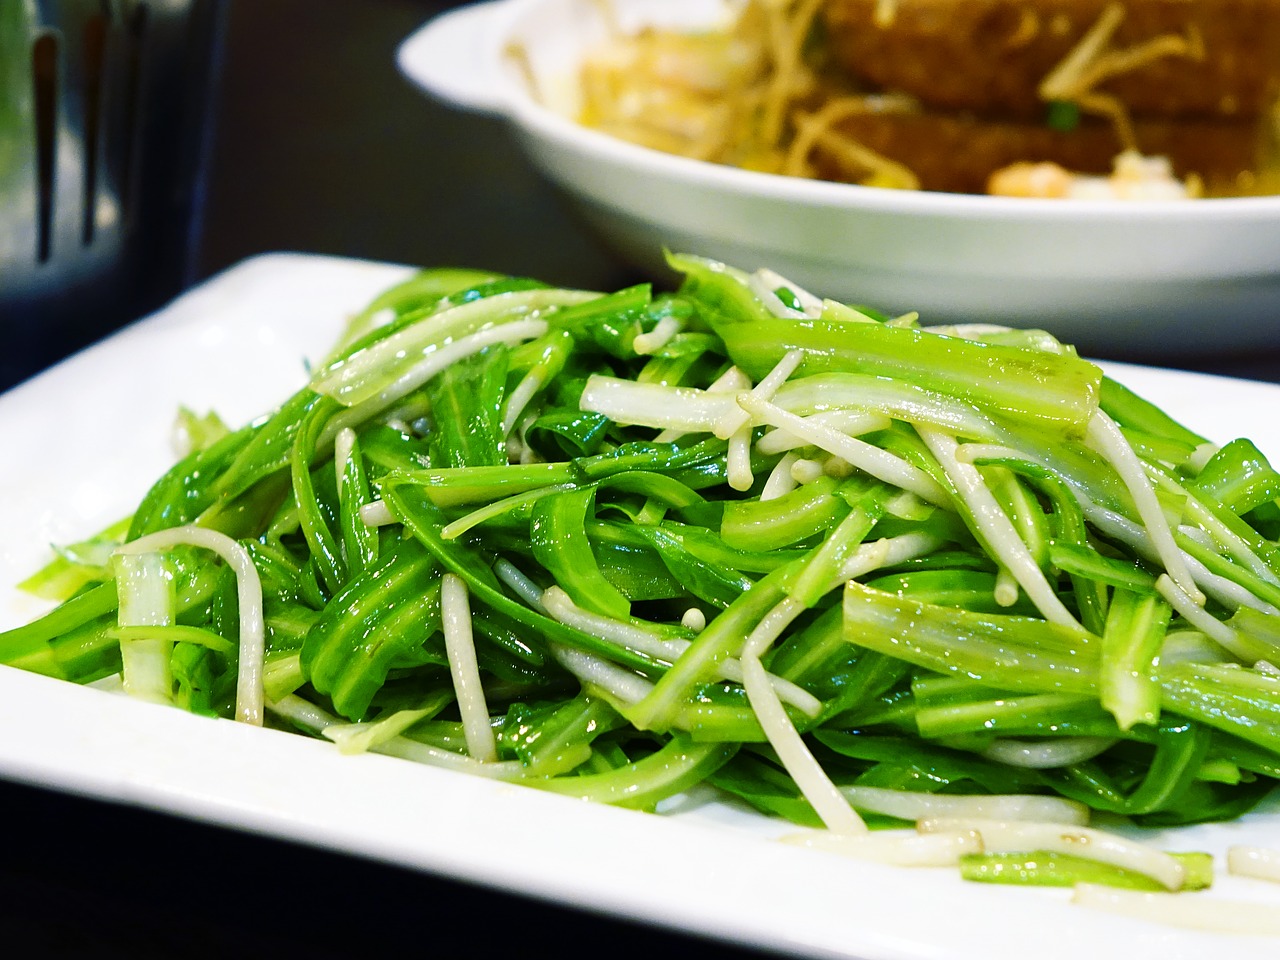 green dragon vegetable 青龙菜 bean sprouts free photo